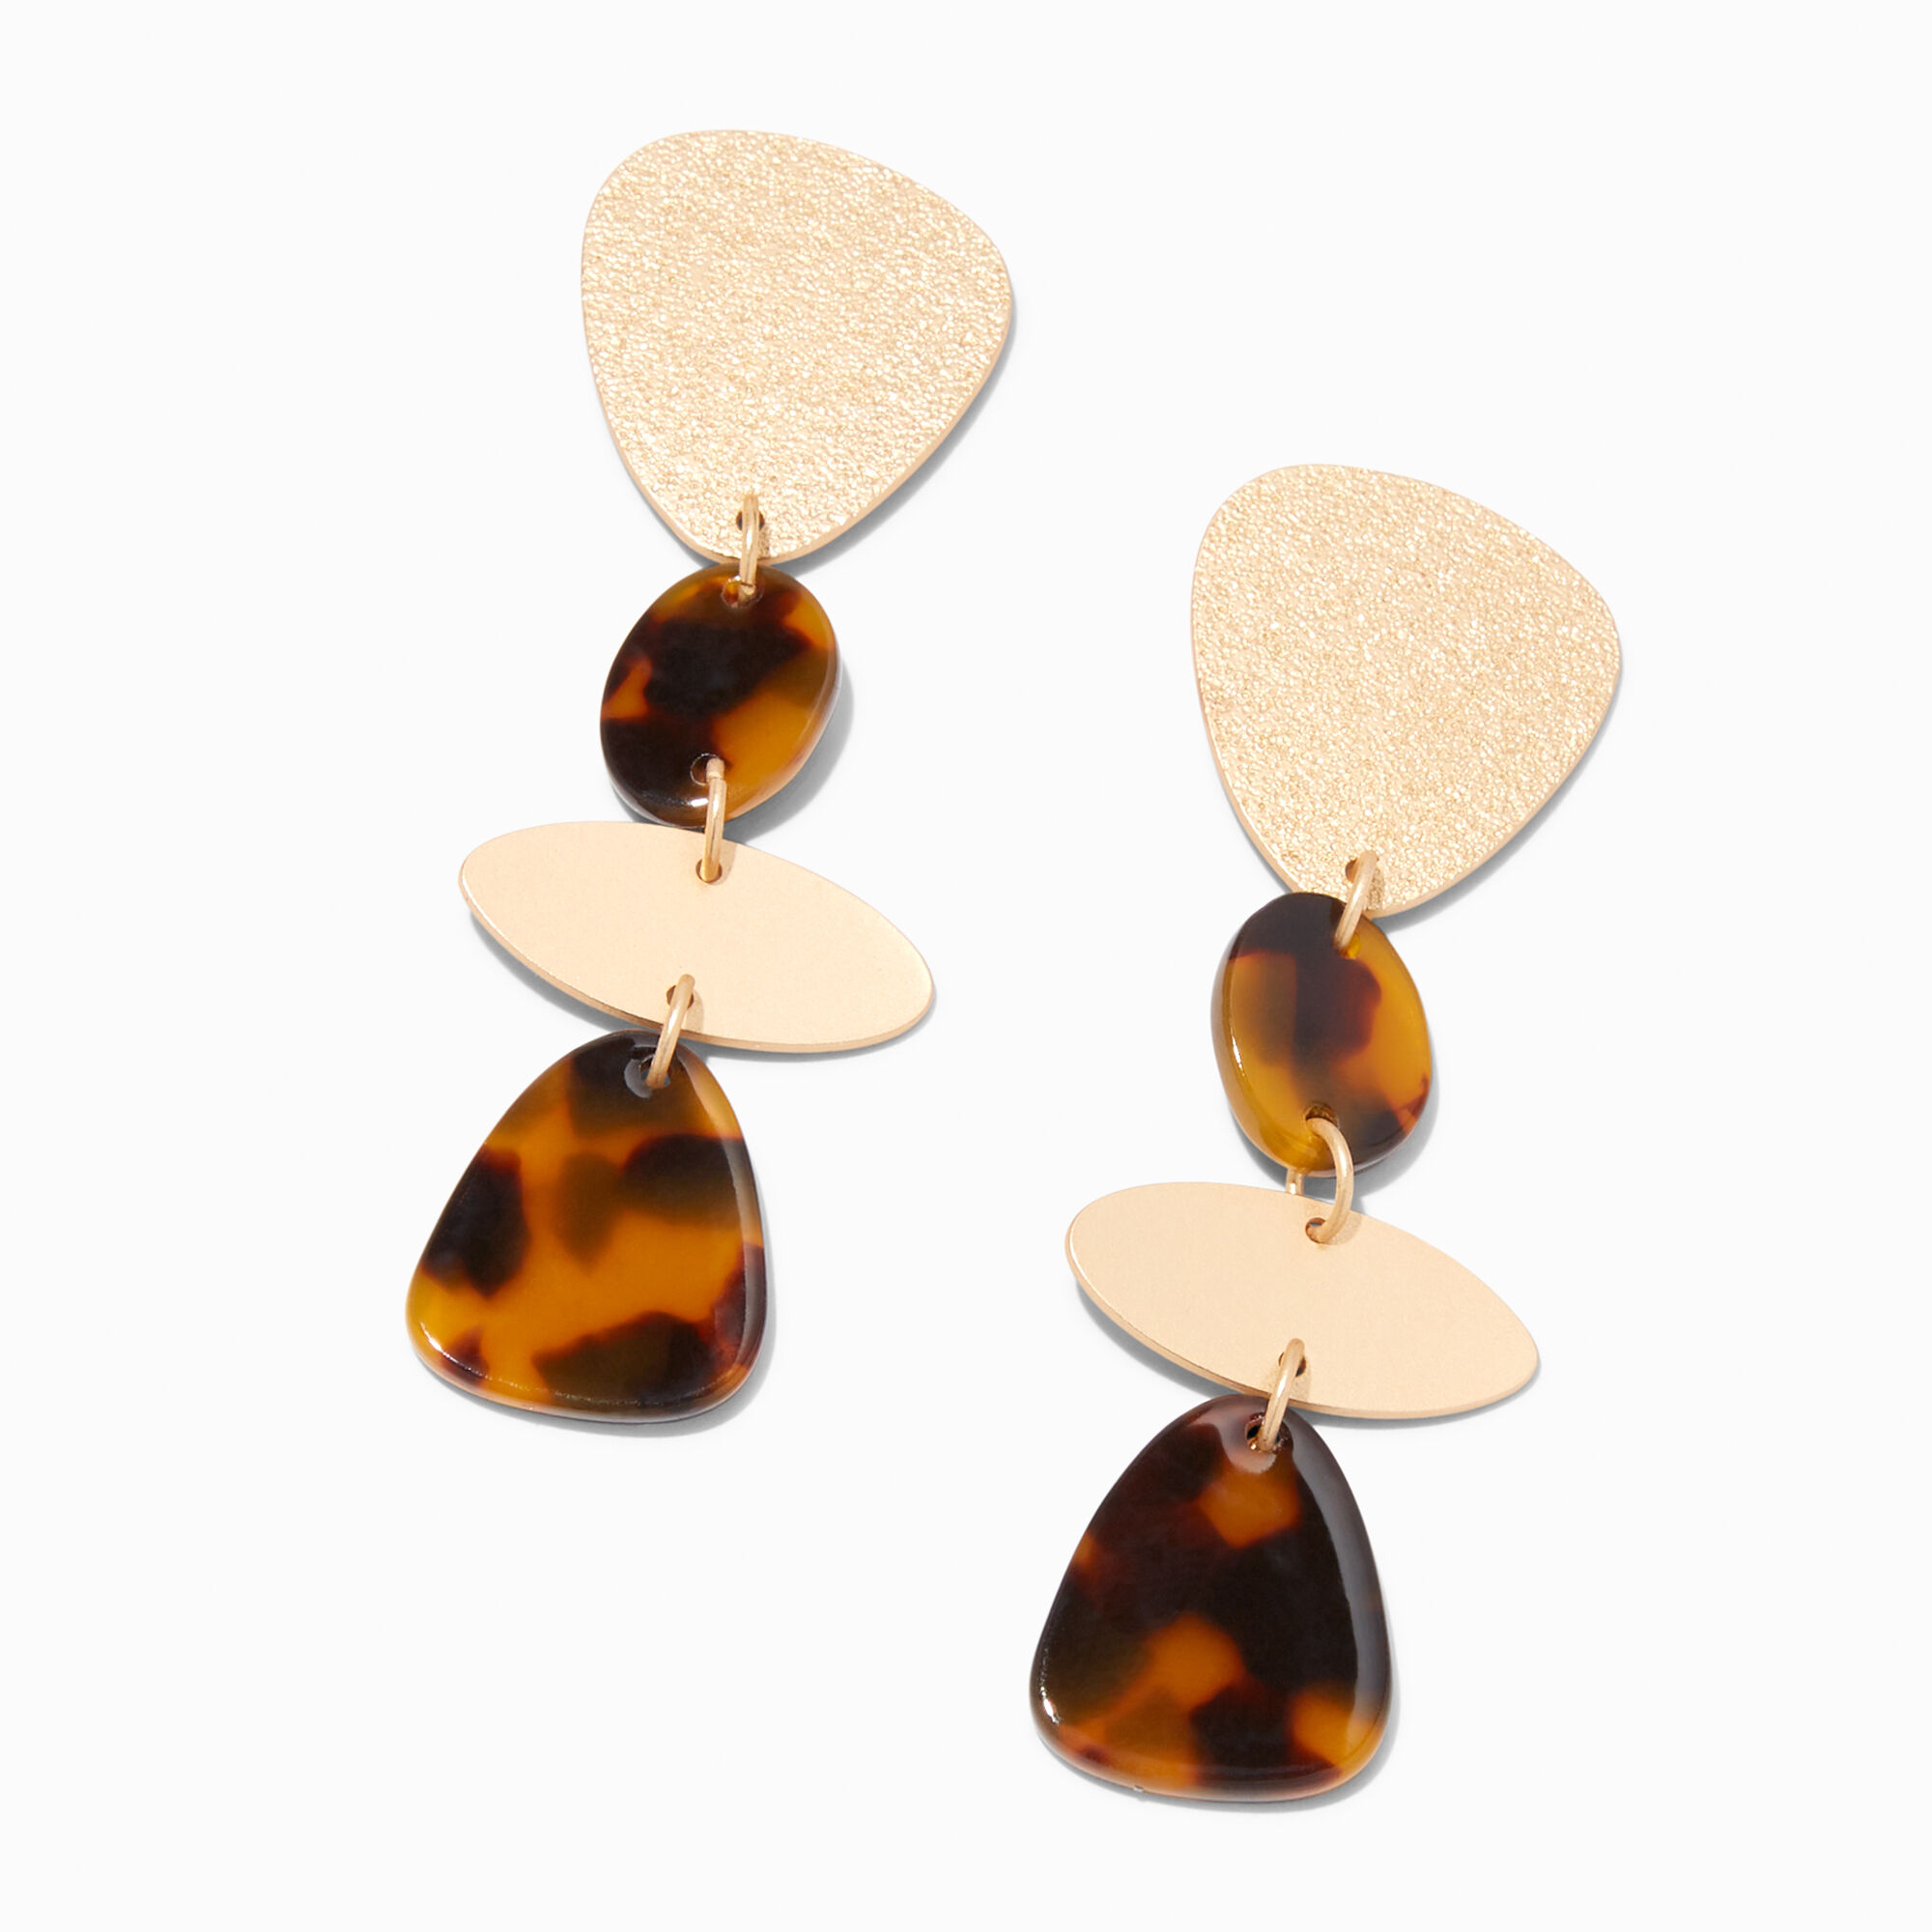 View Claires Tone 3 Tortoiseshell Geometric Linear Drop Earrings Gold information